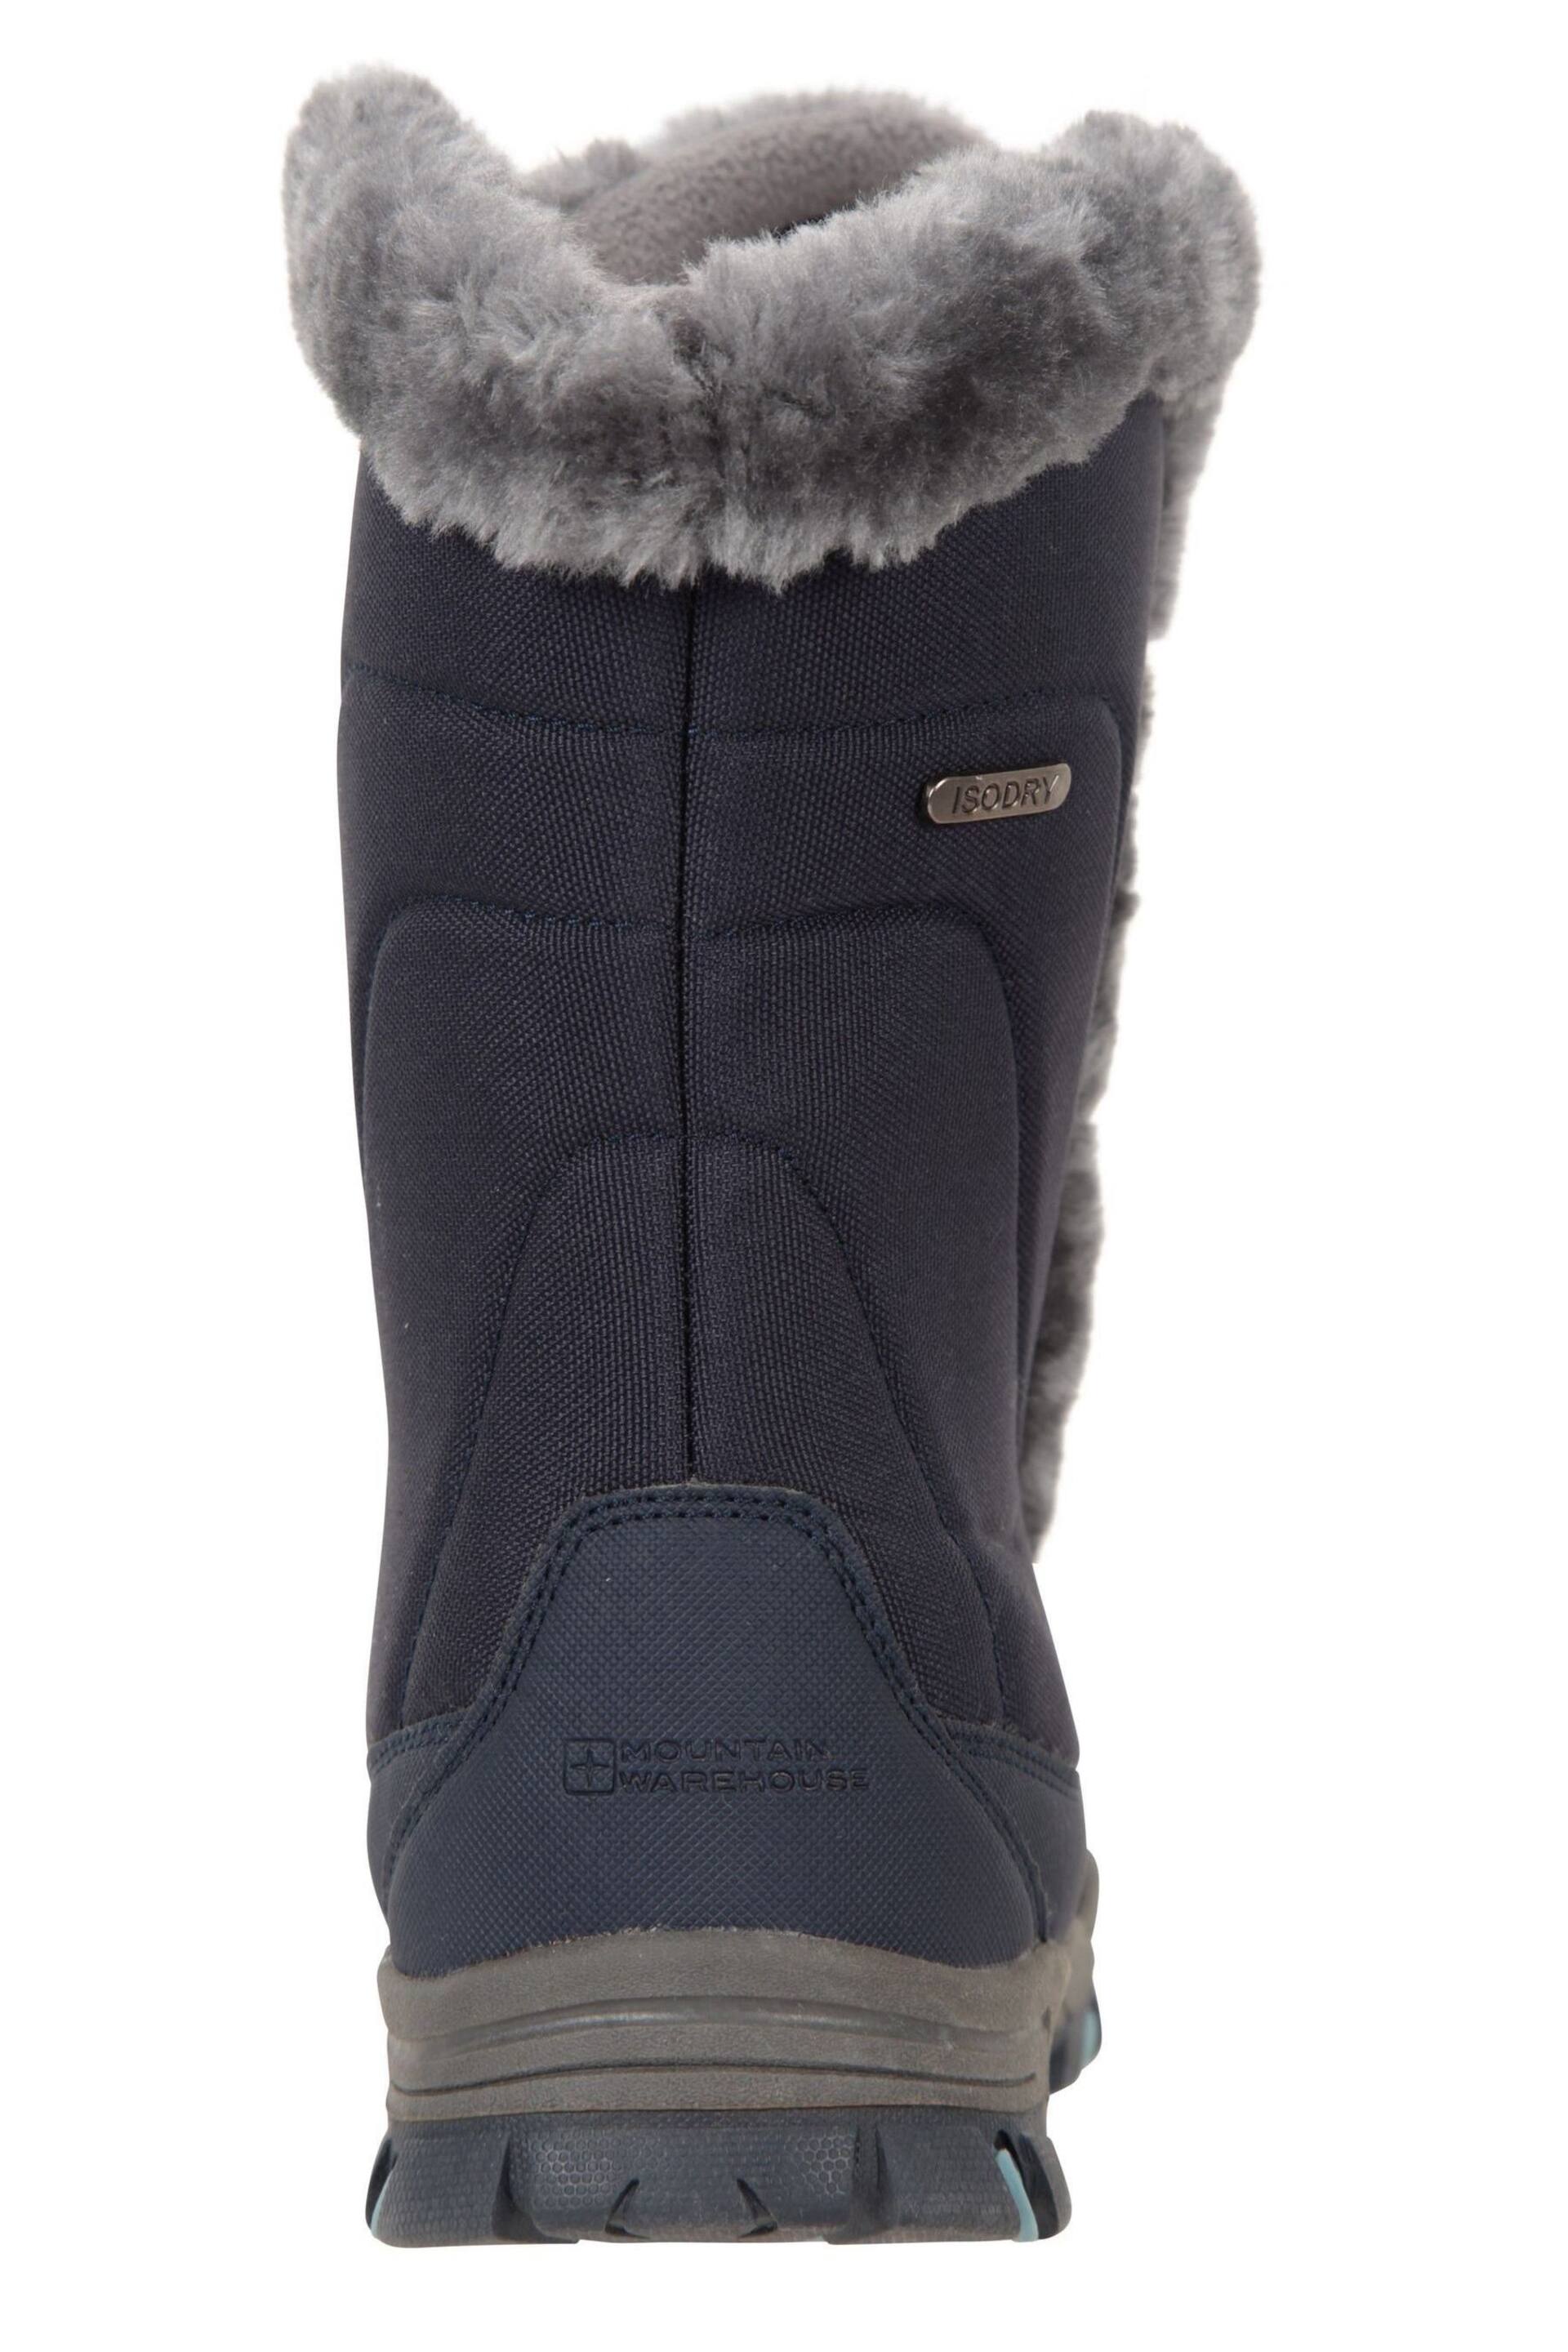 Mountain Warehouse Blue Womens Ohio Thermal Fleece Lined Snow Boots - Image 5 of 5